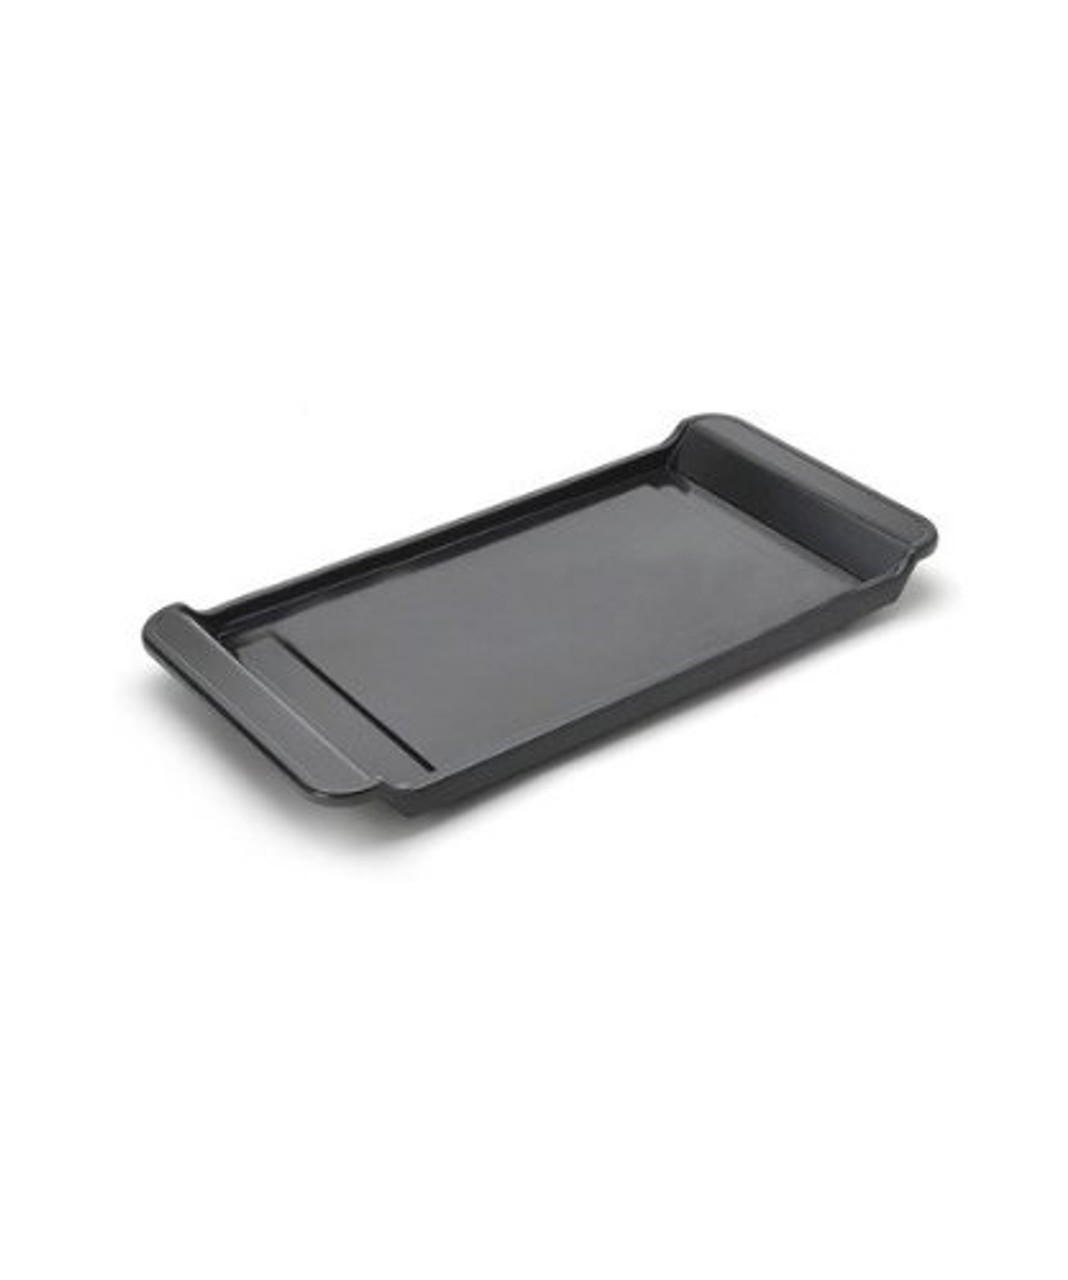  DG61-00563A Griddle Replacement Parts for Samsung